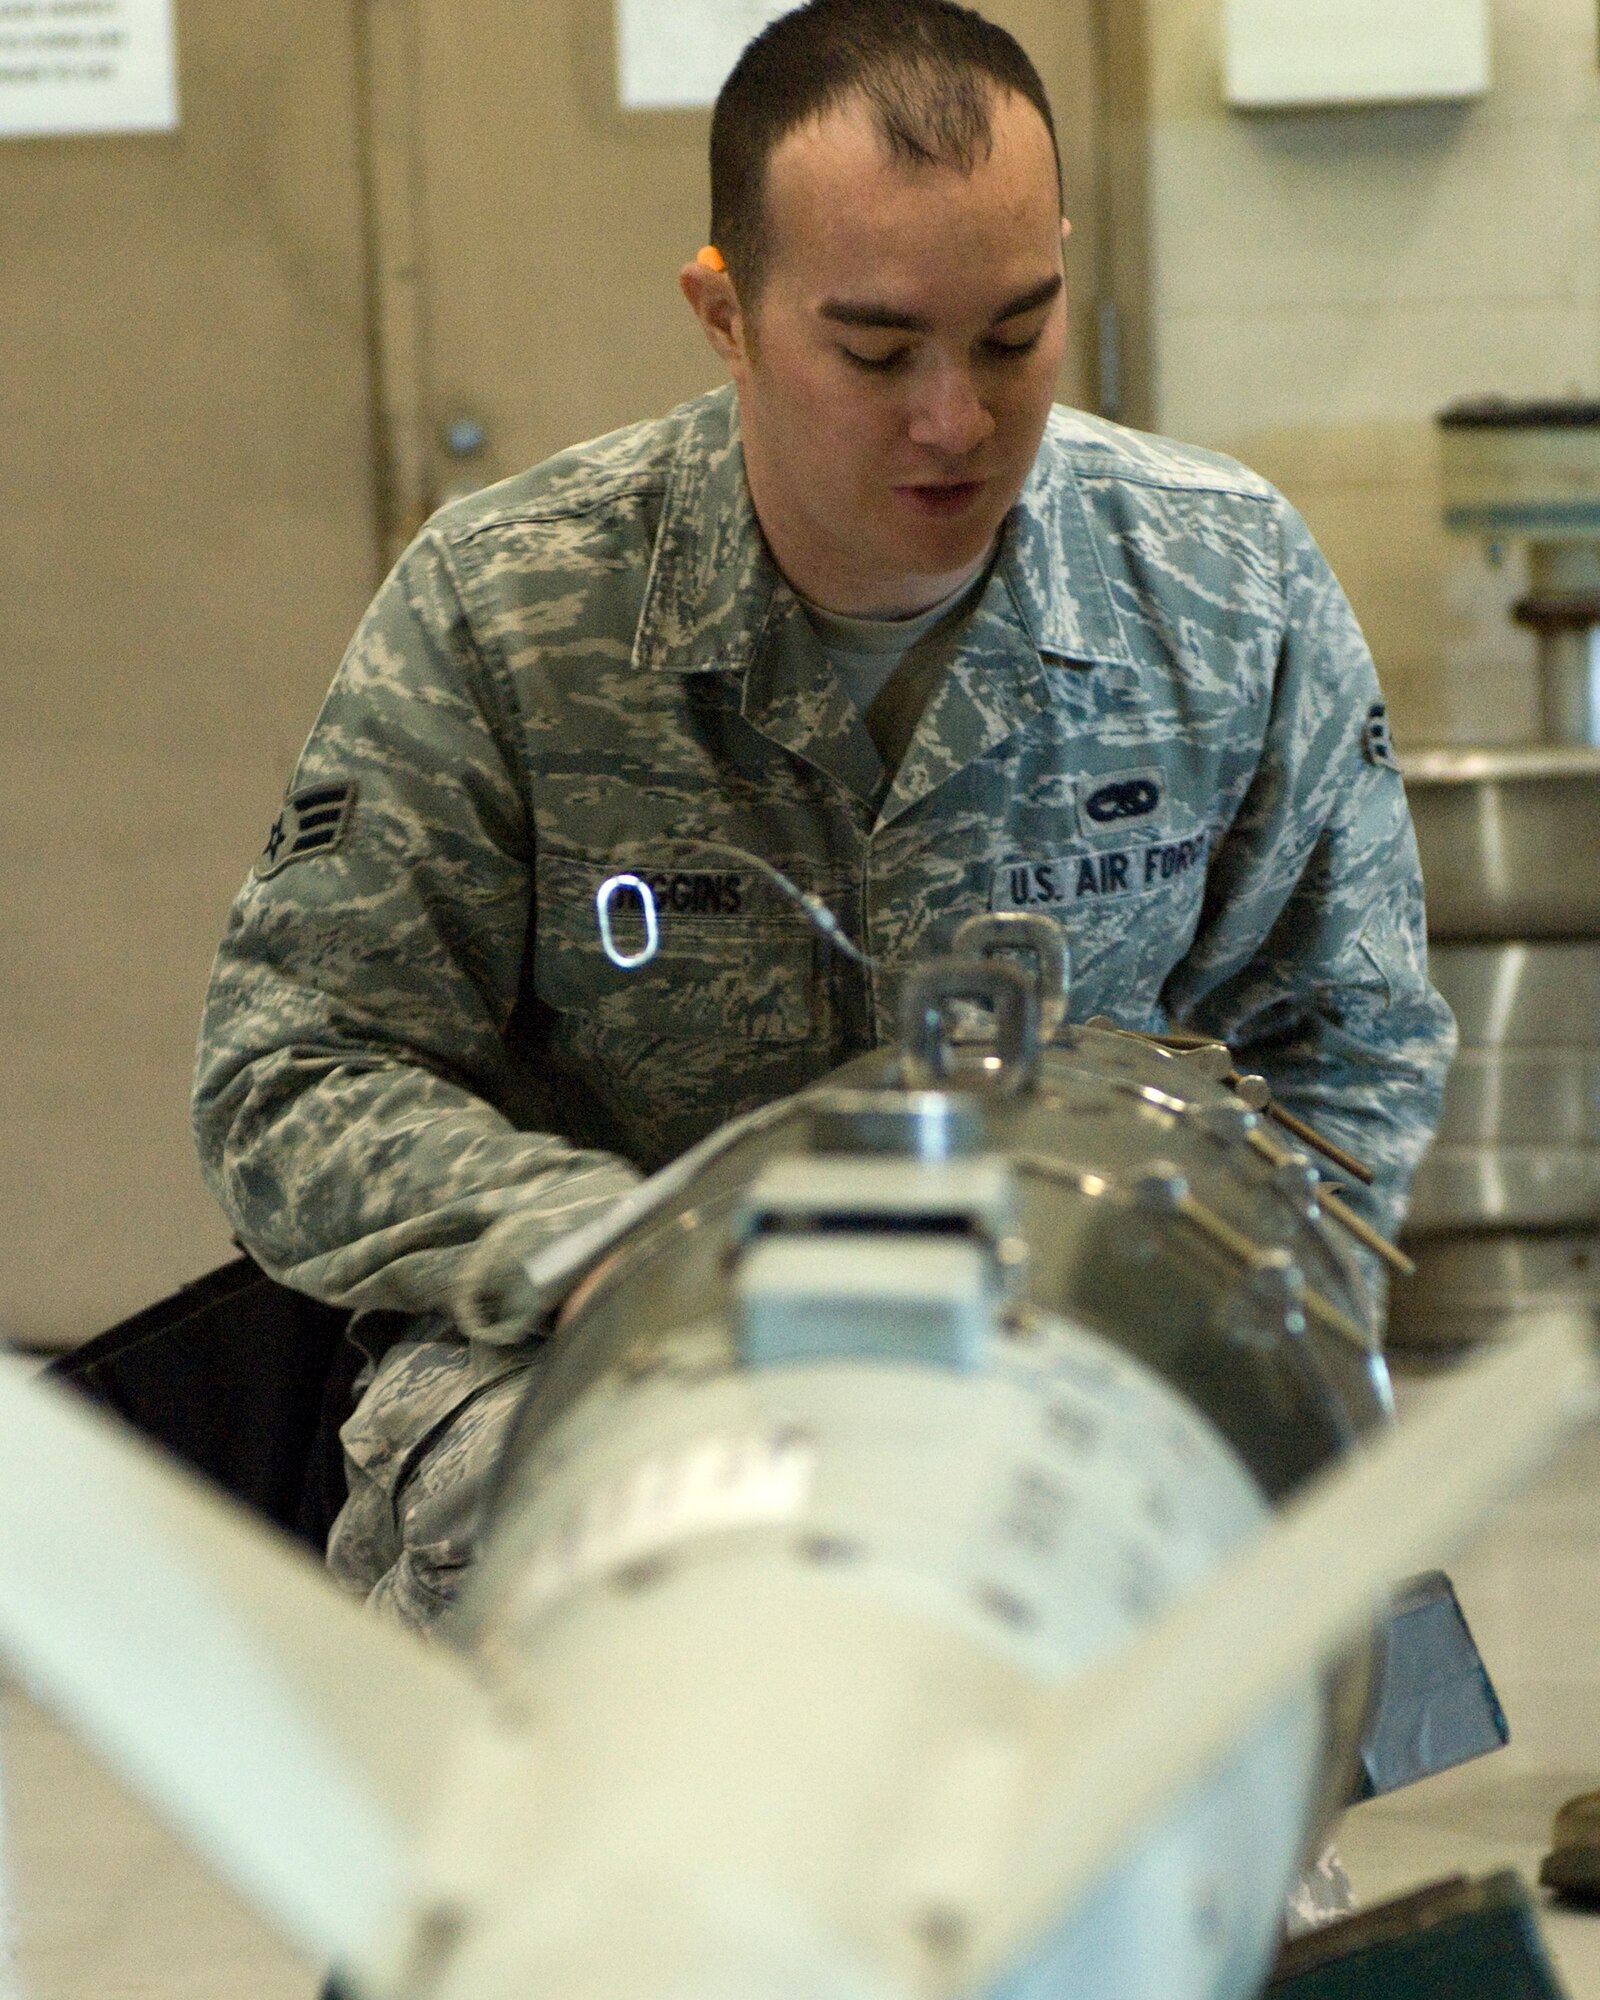 Senior Airman Michael Higgens, 7th Aircraft Maintenance Squadron, inspects a GBU-54 guided bomb during the Weapons Load Crew of the Year competition Feb. 1, 2013, at Dyess Air Force Base, Texas. The competition was comprised of loading four different munitions into a B-1 simulator while being evaluated on their use of checklists, safety procedures, and overall speed. (U.S. Air Force photo by Airman 1st Class Kylsee Wisseman/Released)